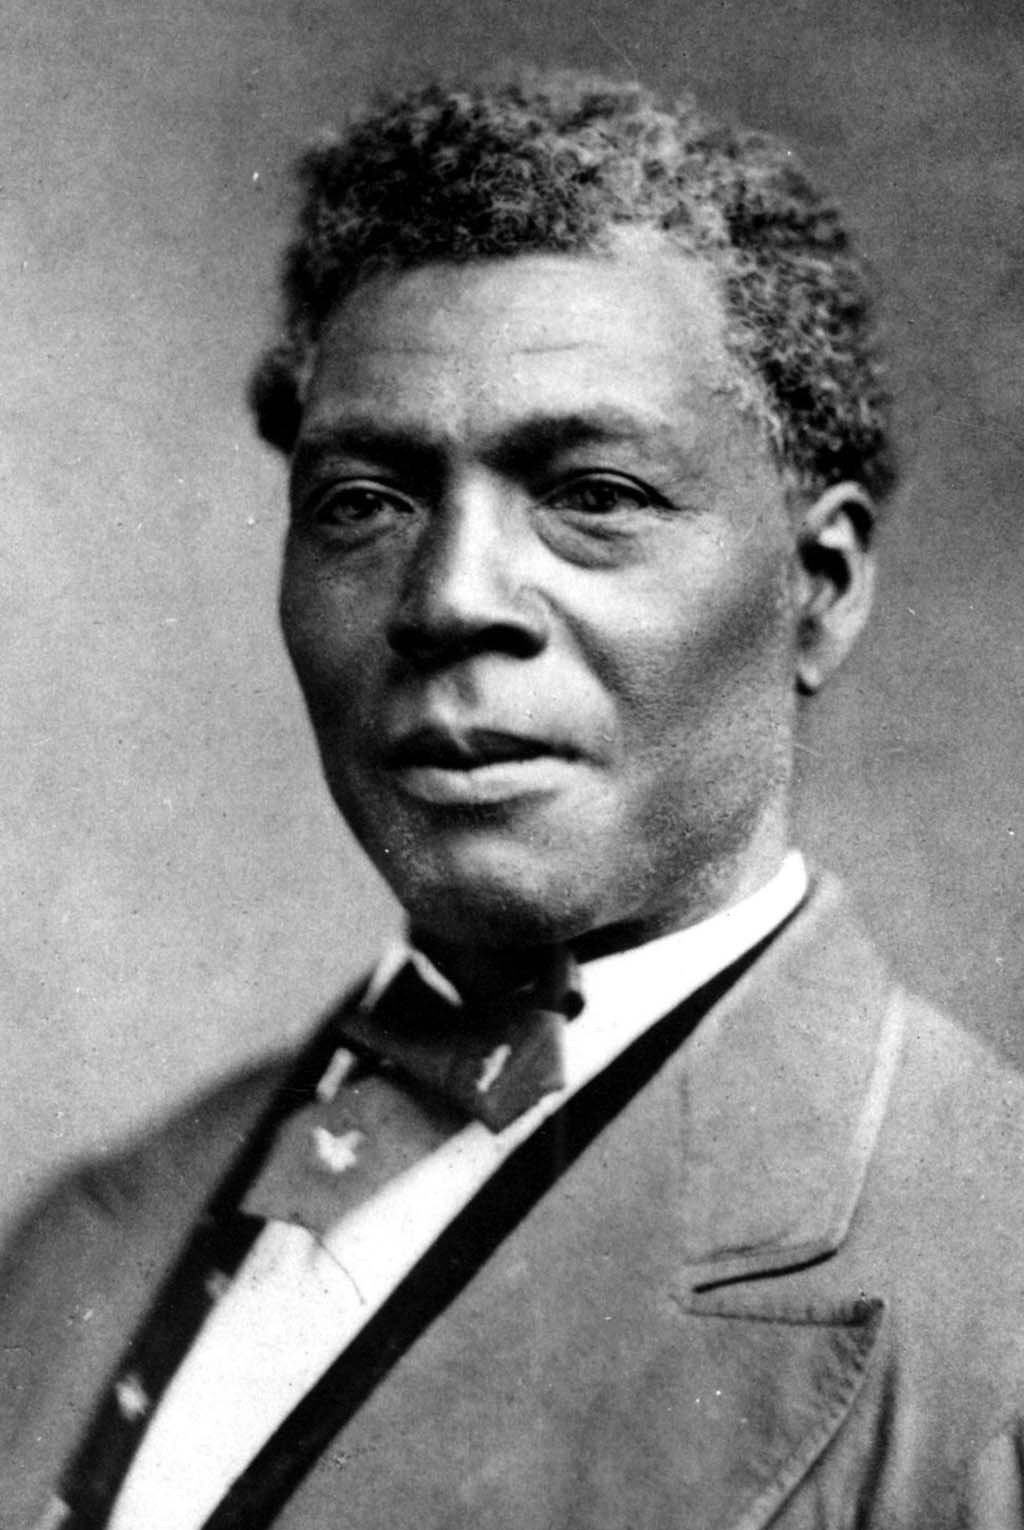 Did you know the freed slave kneeling before Lincoln was Muhammad Ali&#039;s great-great-great-grandfather?